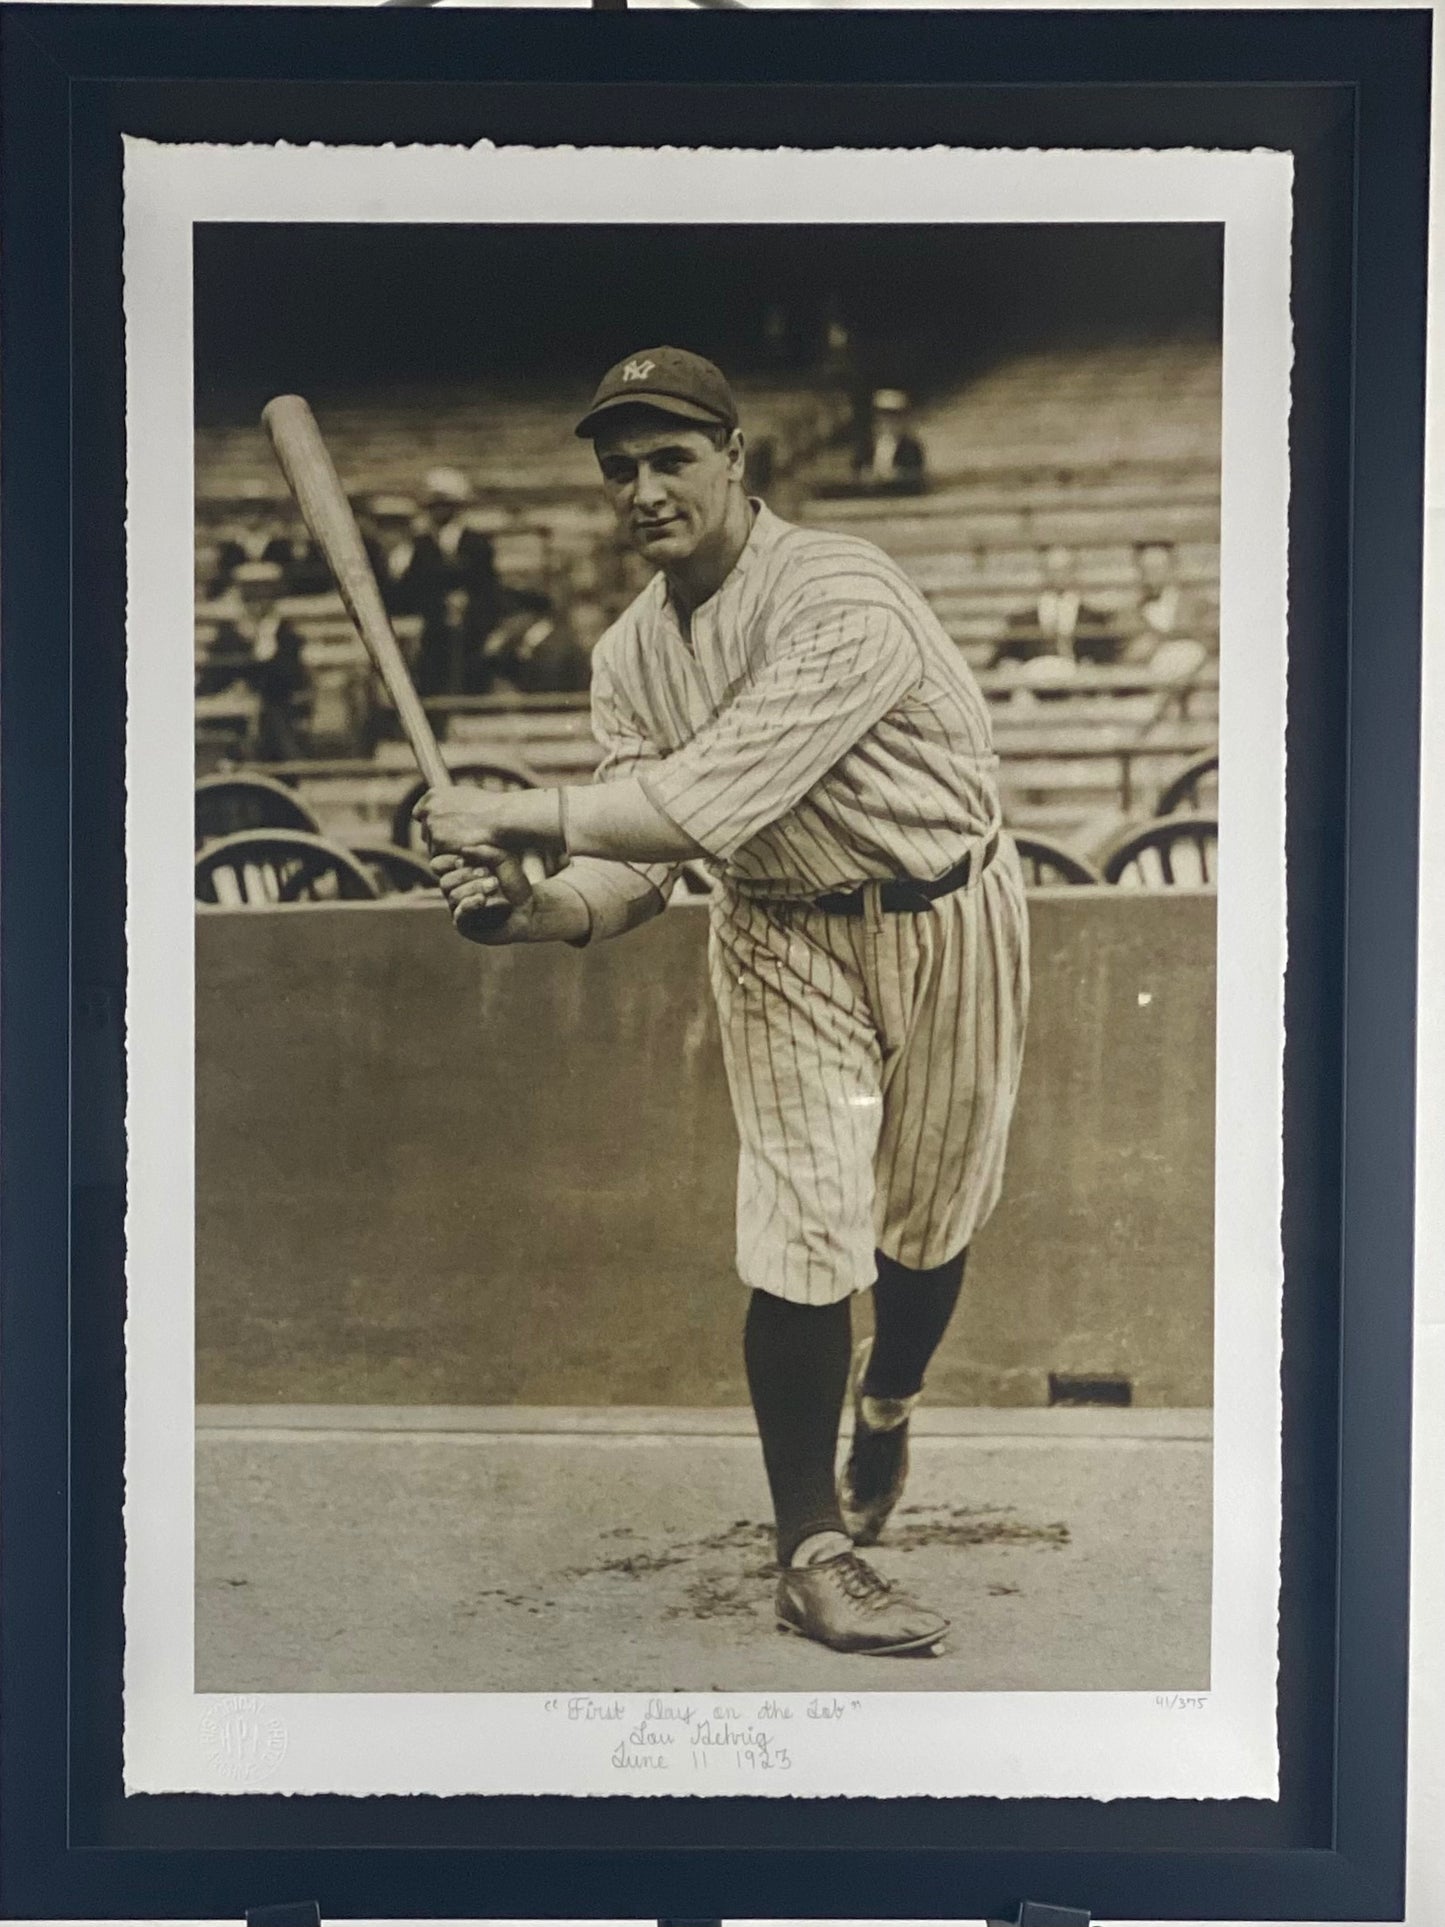 Lou Gehrig Professionally Framed "First Day on the Job"